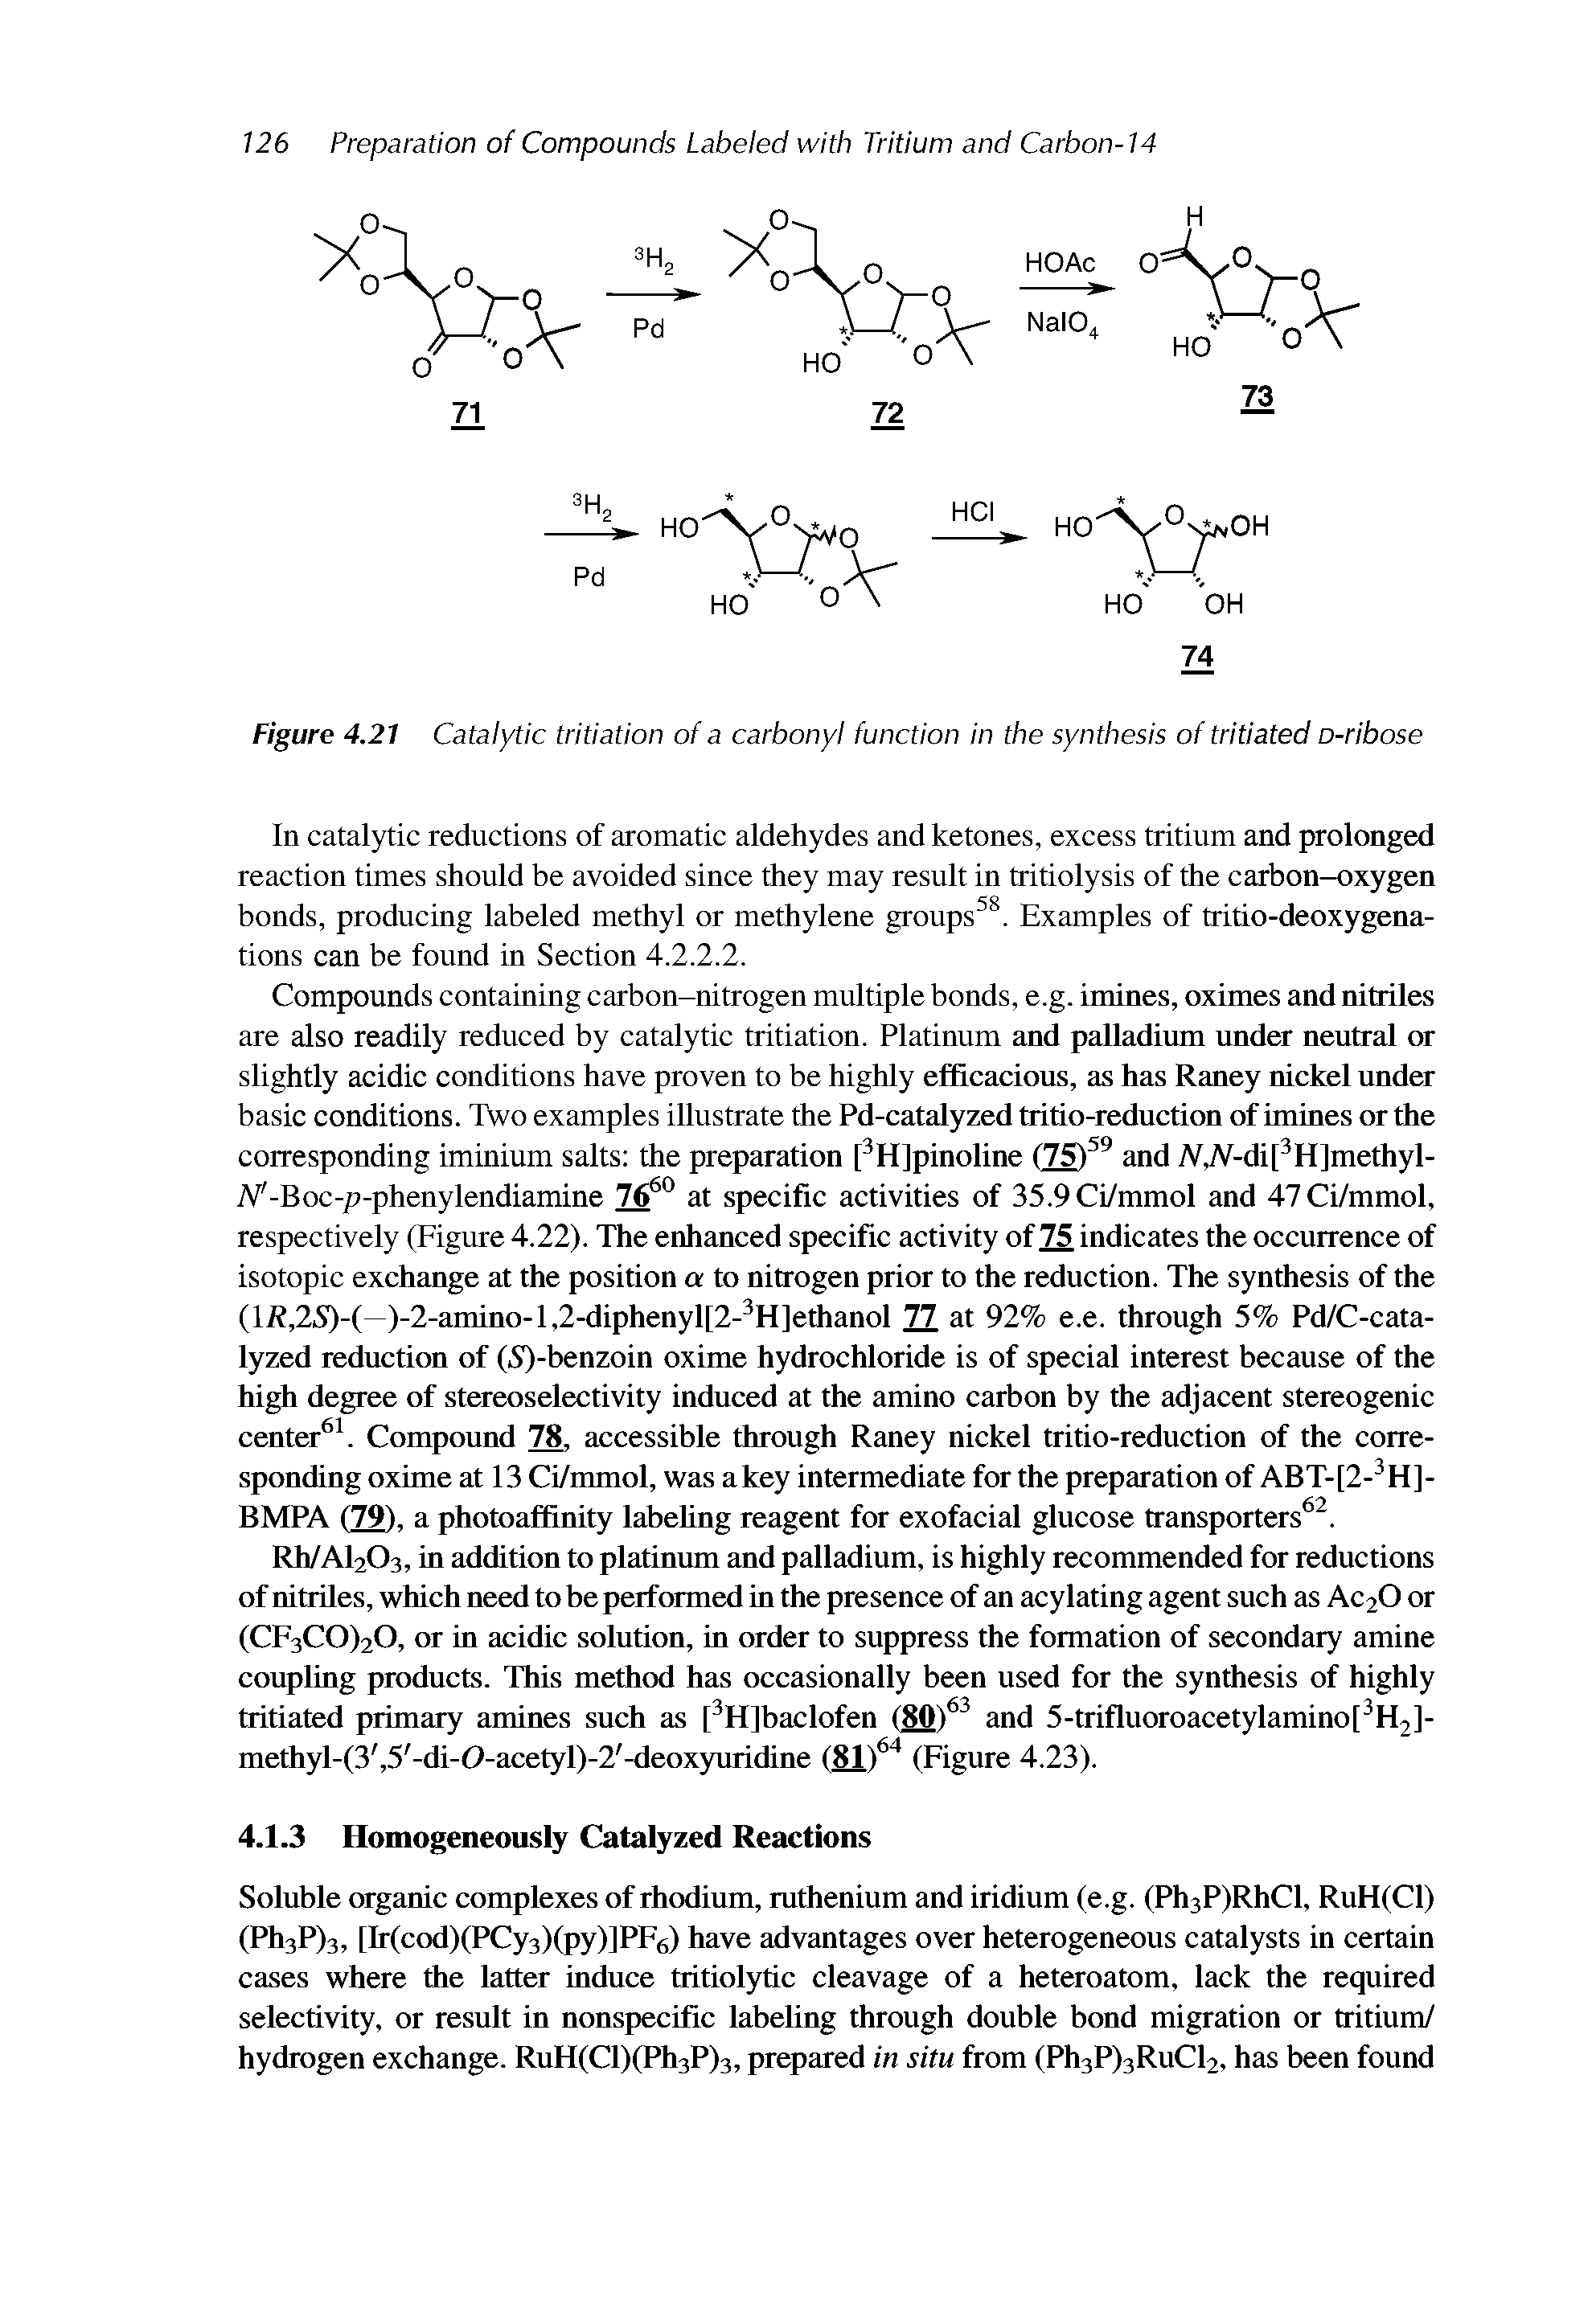 Figure 4.21 Catalytic tritiation of a carbonyl function in the synthesis oftritiated o-ribose...